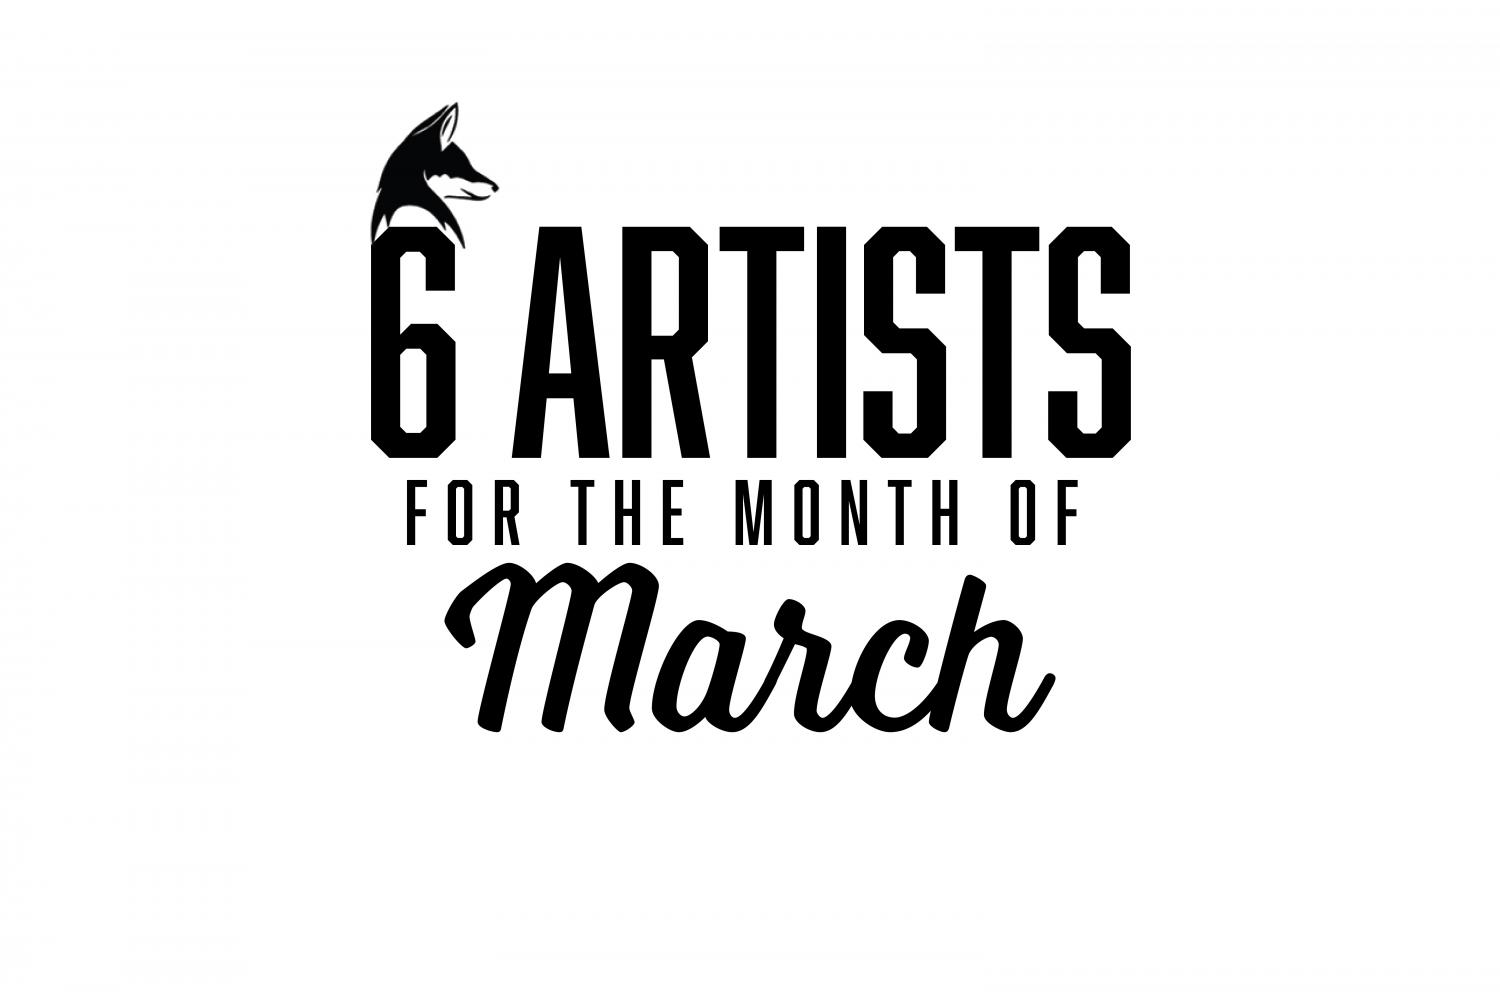 Six Artists you Should Be Listening To: March 2022